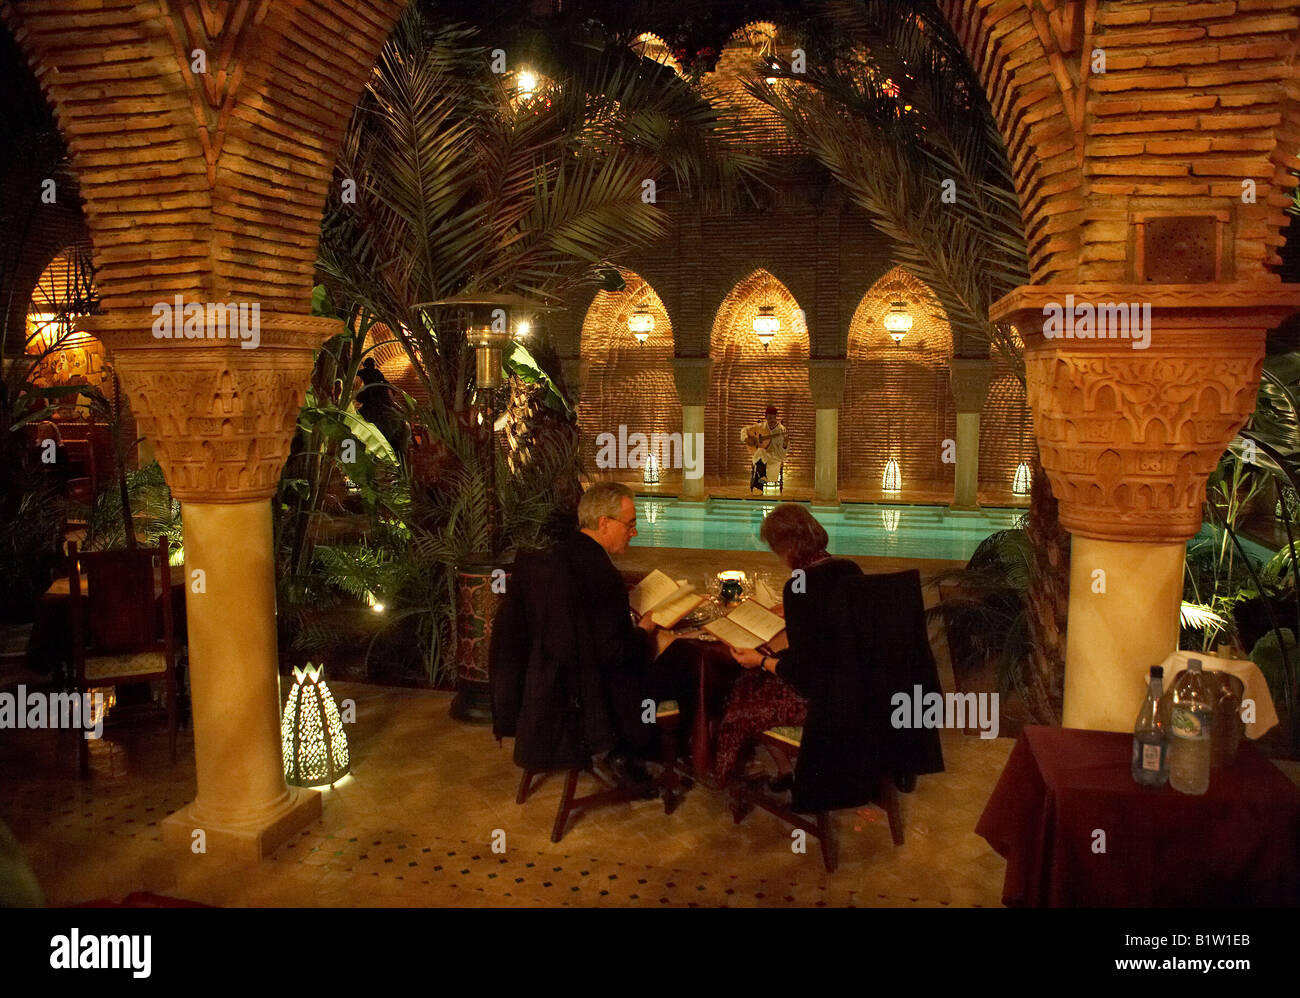 Tourist dining at Hotel in Marrakech, Morocco Stock Photo